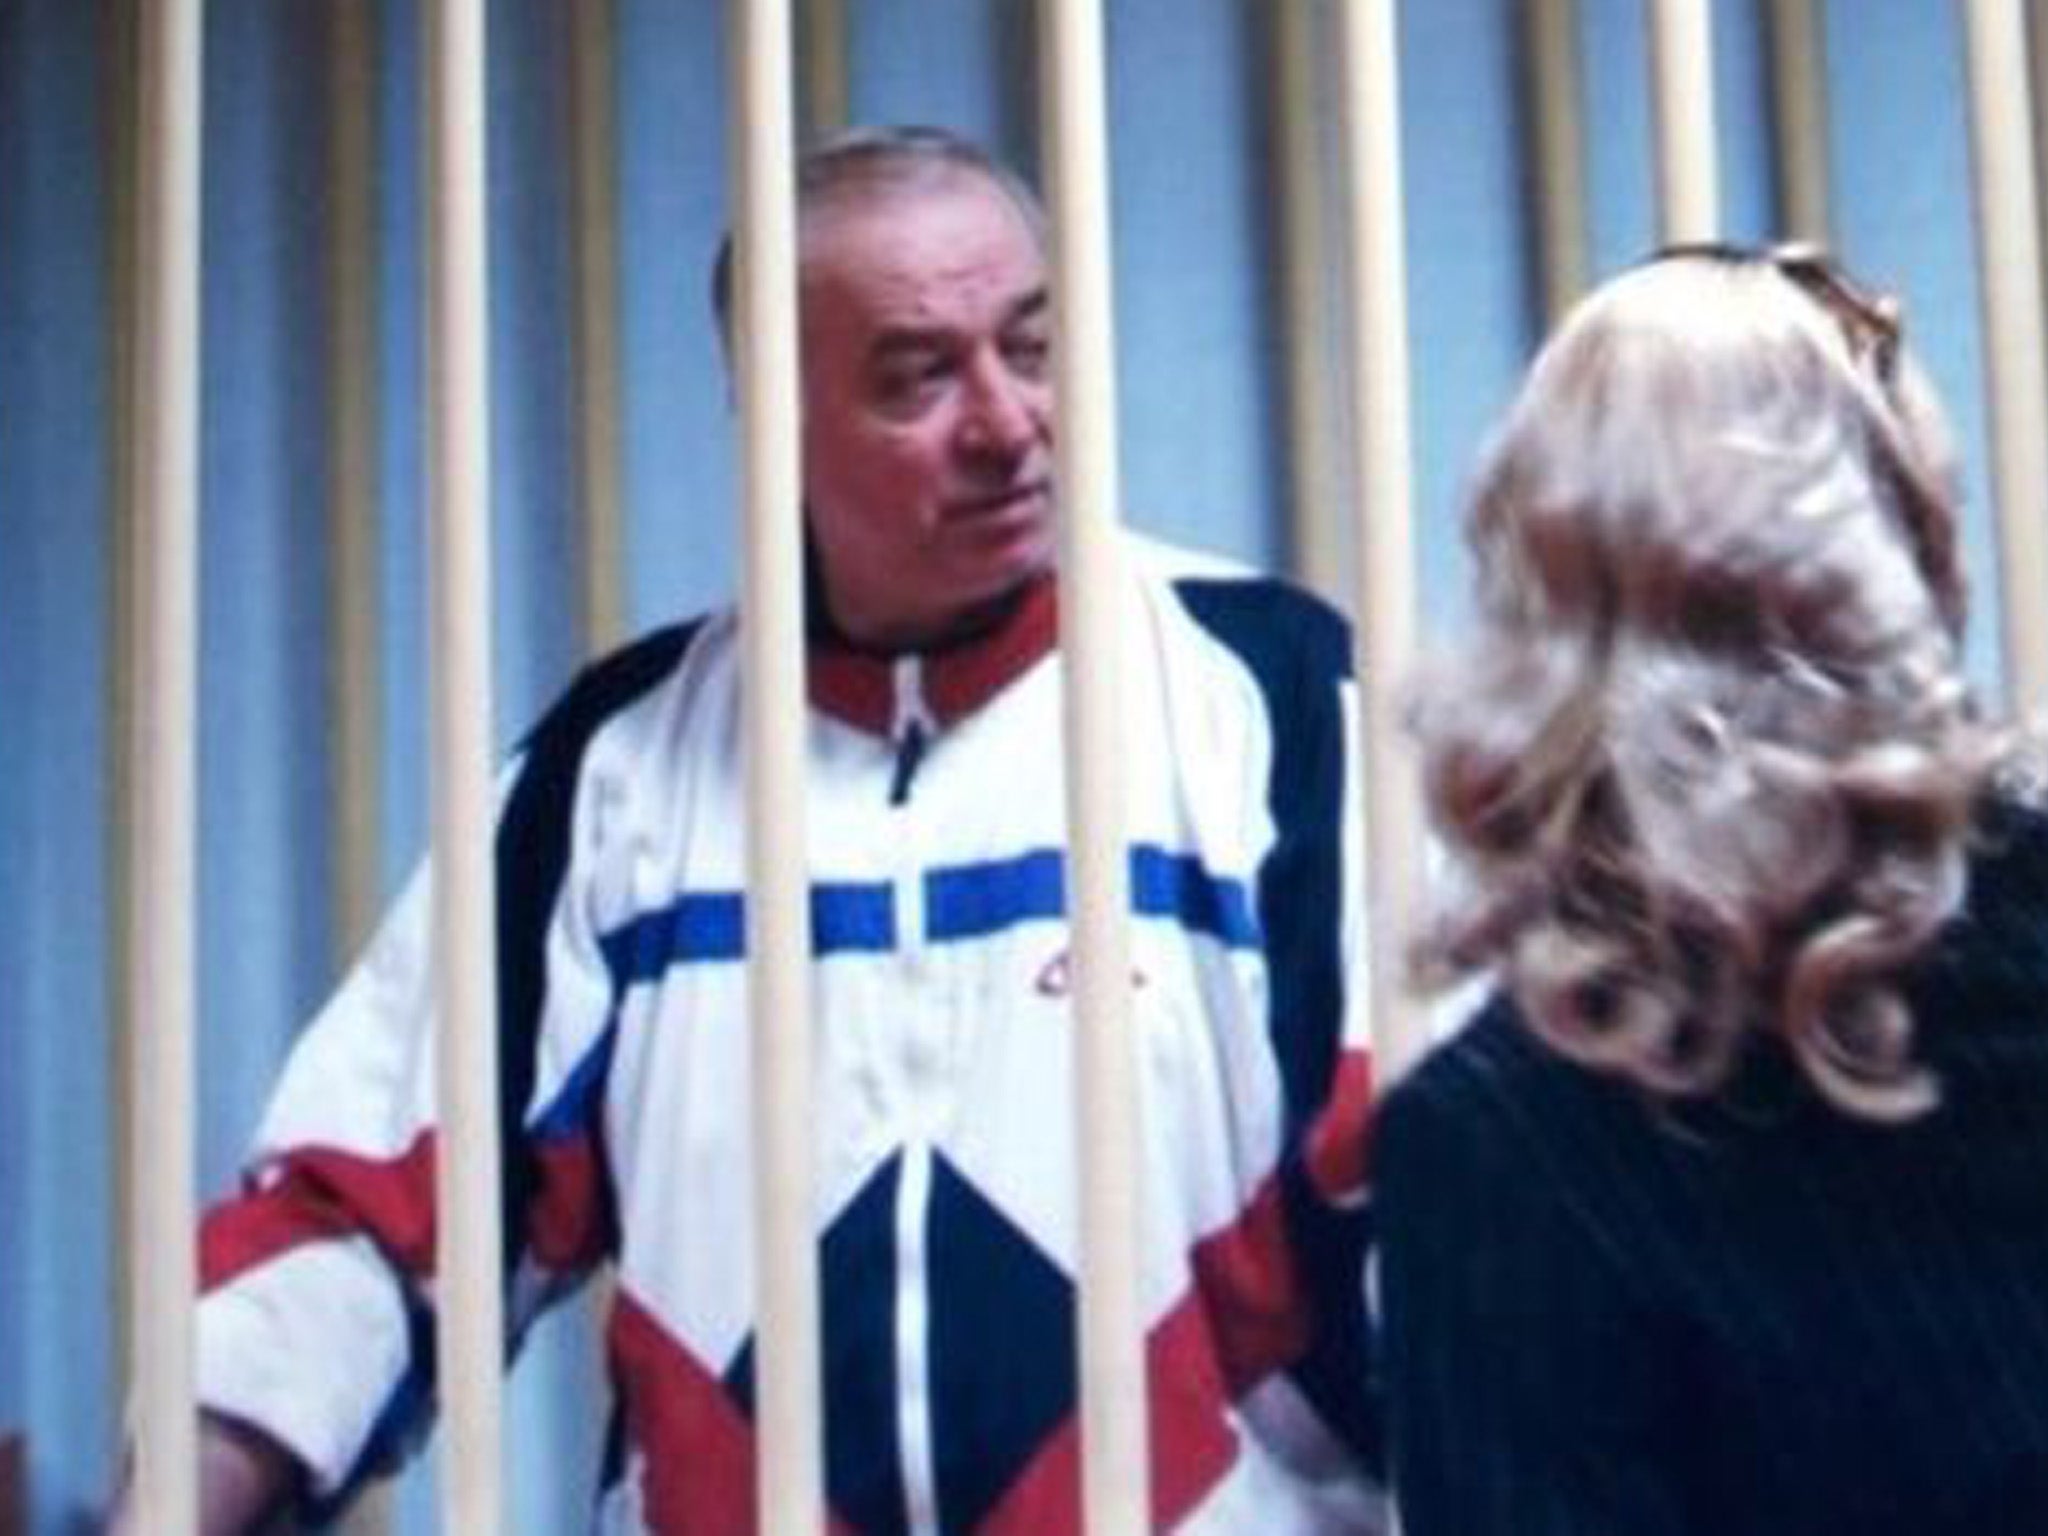 Sergei Skripal was freed in a 2010 deal which saw 10 Russian sleeper agents expelled from the United States